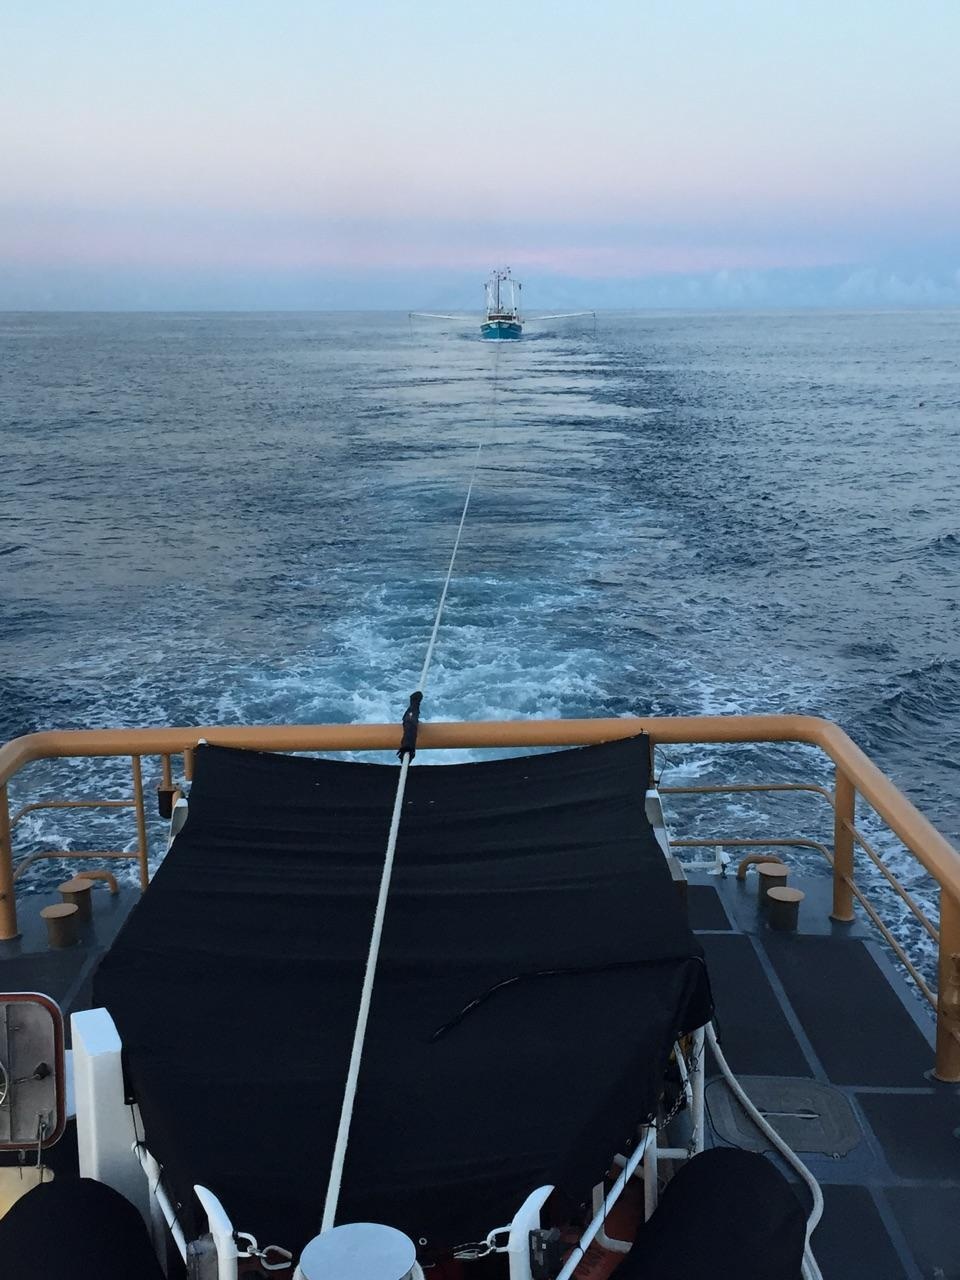 Coast Guard Cutter Sailfish assists disabled fishing vessel east of Manasquan Inlet